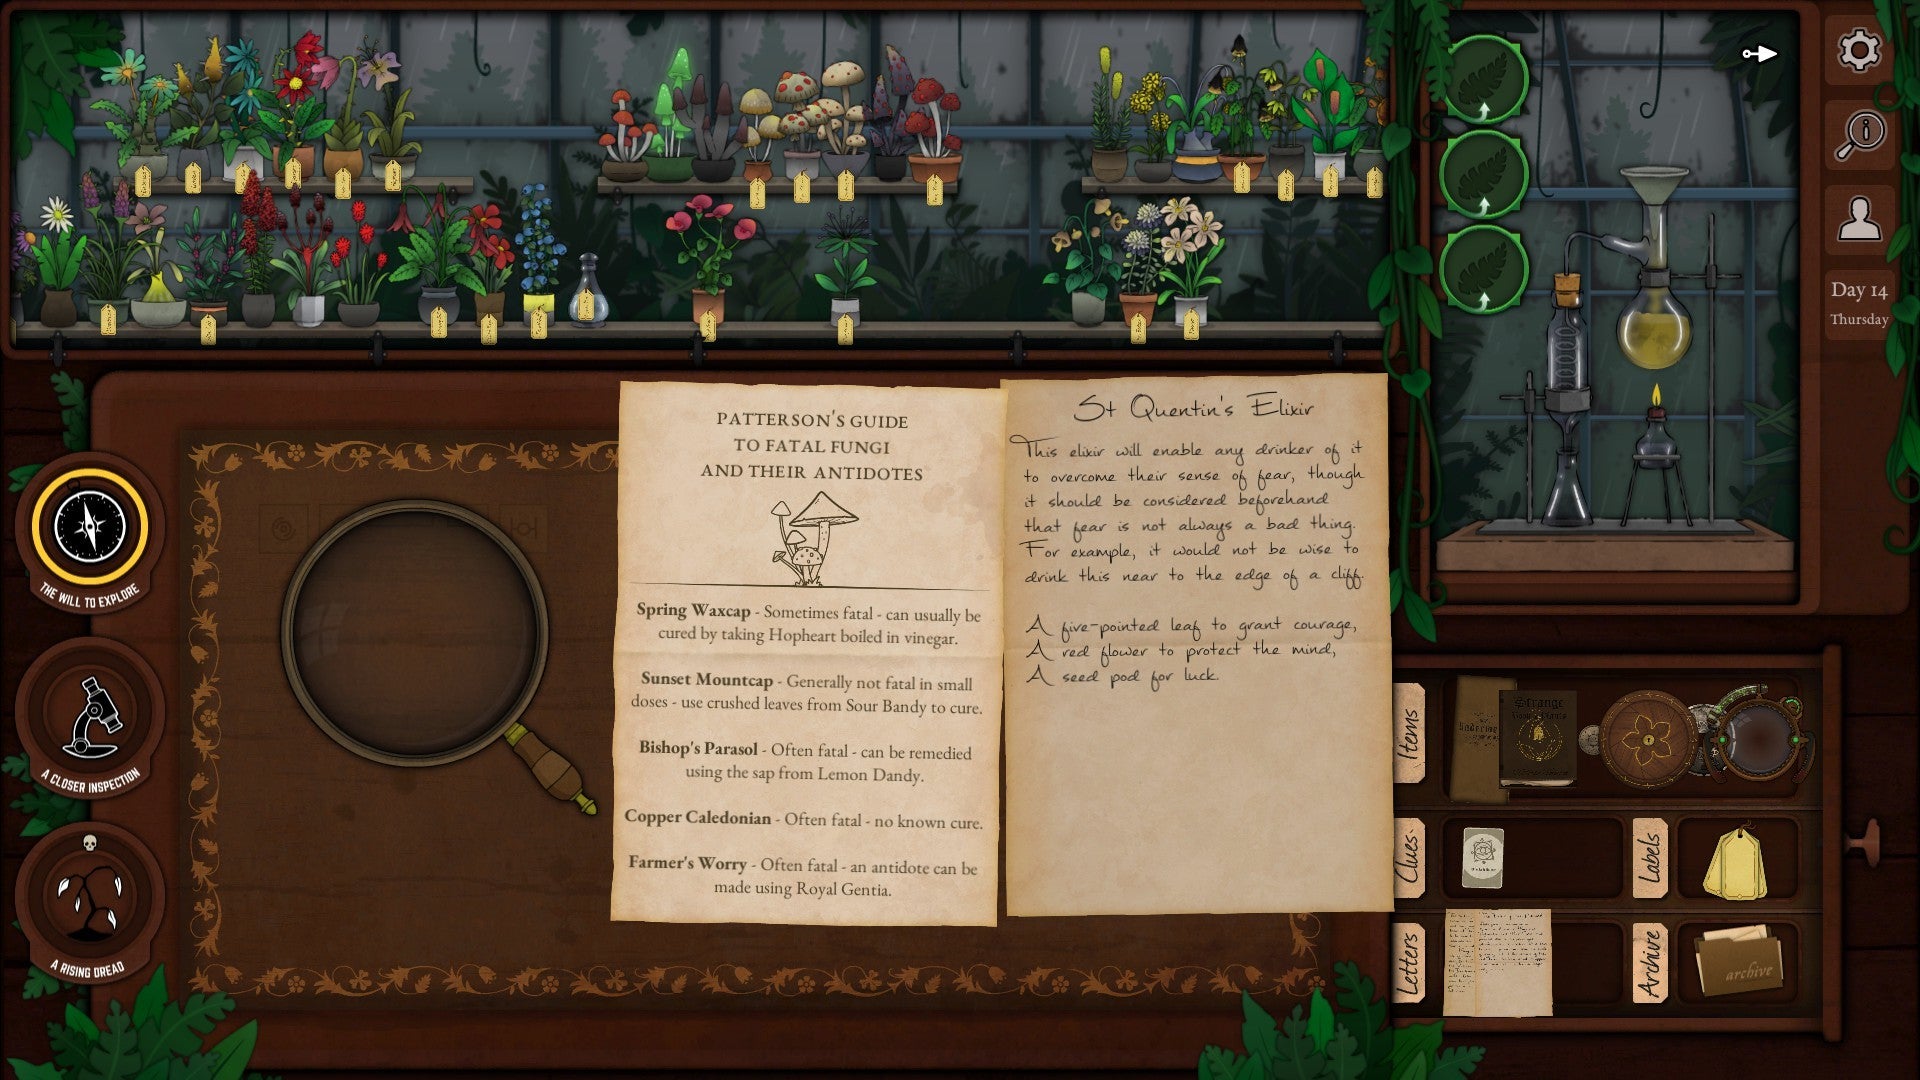 2022 best games Strange Horticulture - a book of notes on plants and magnifying glass in the foreground, with a shop full of plants in the background